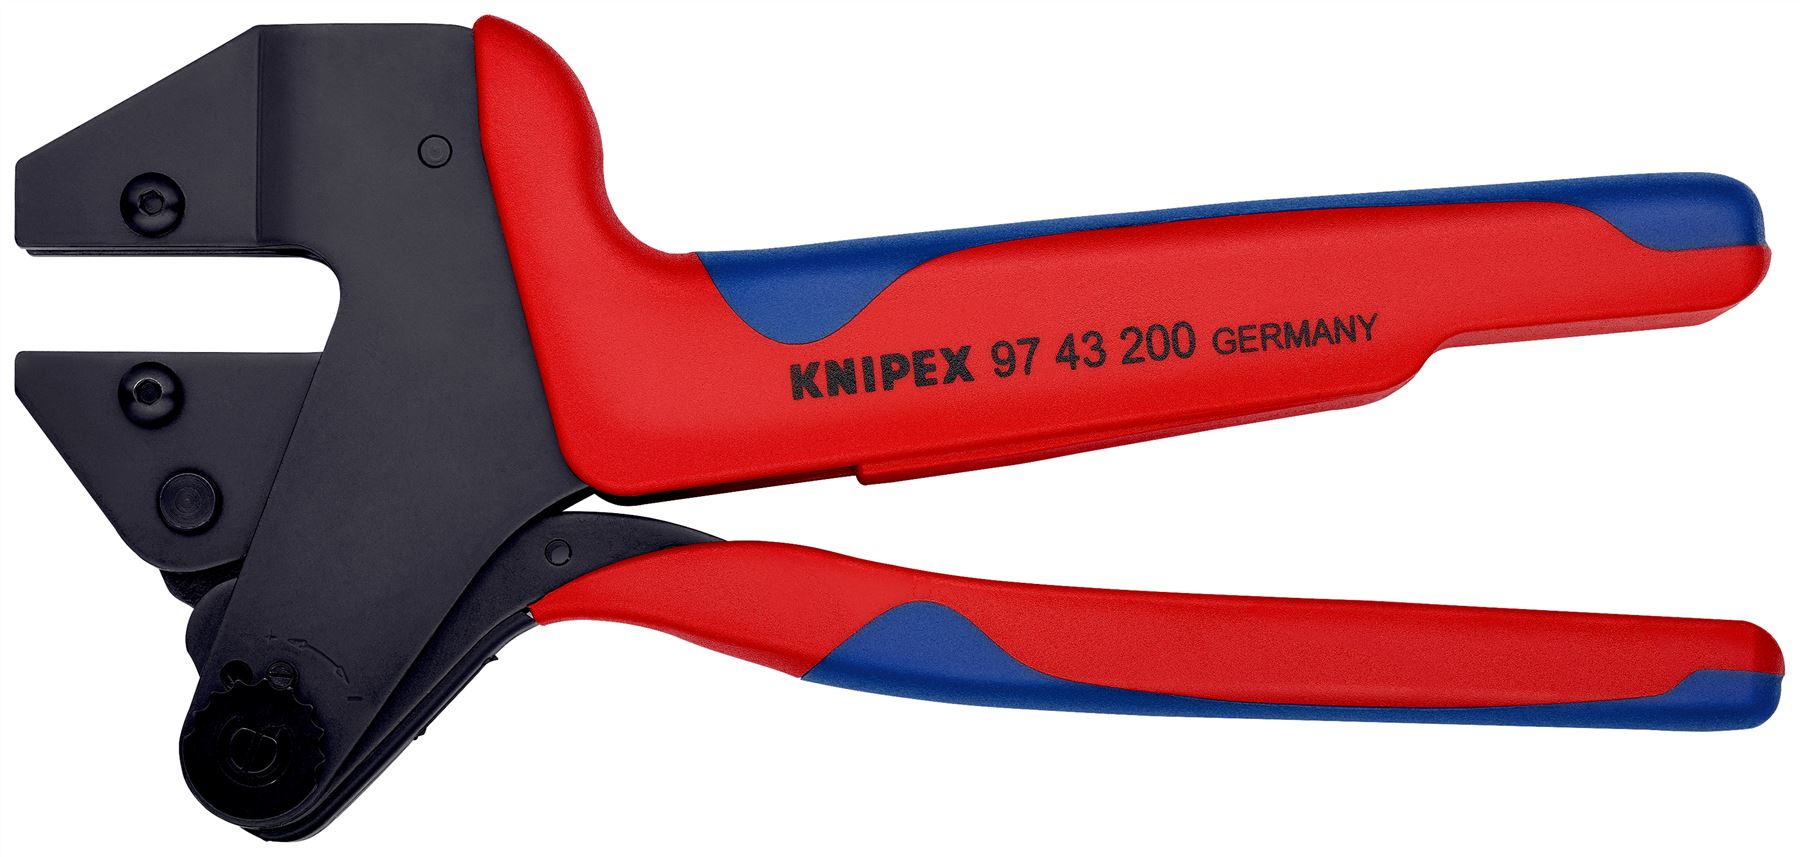 KNIPEX Crimp System Pliers without Crimping Dies 200mm 97 43 200 A